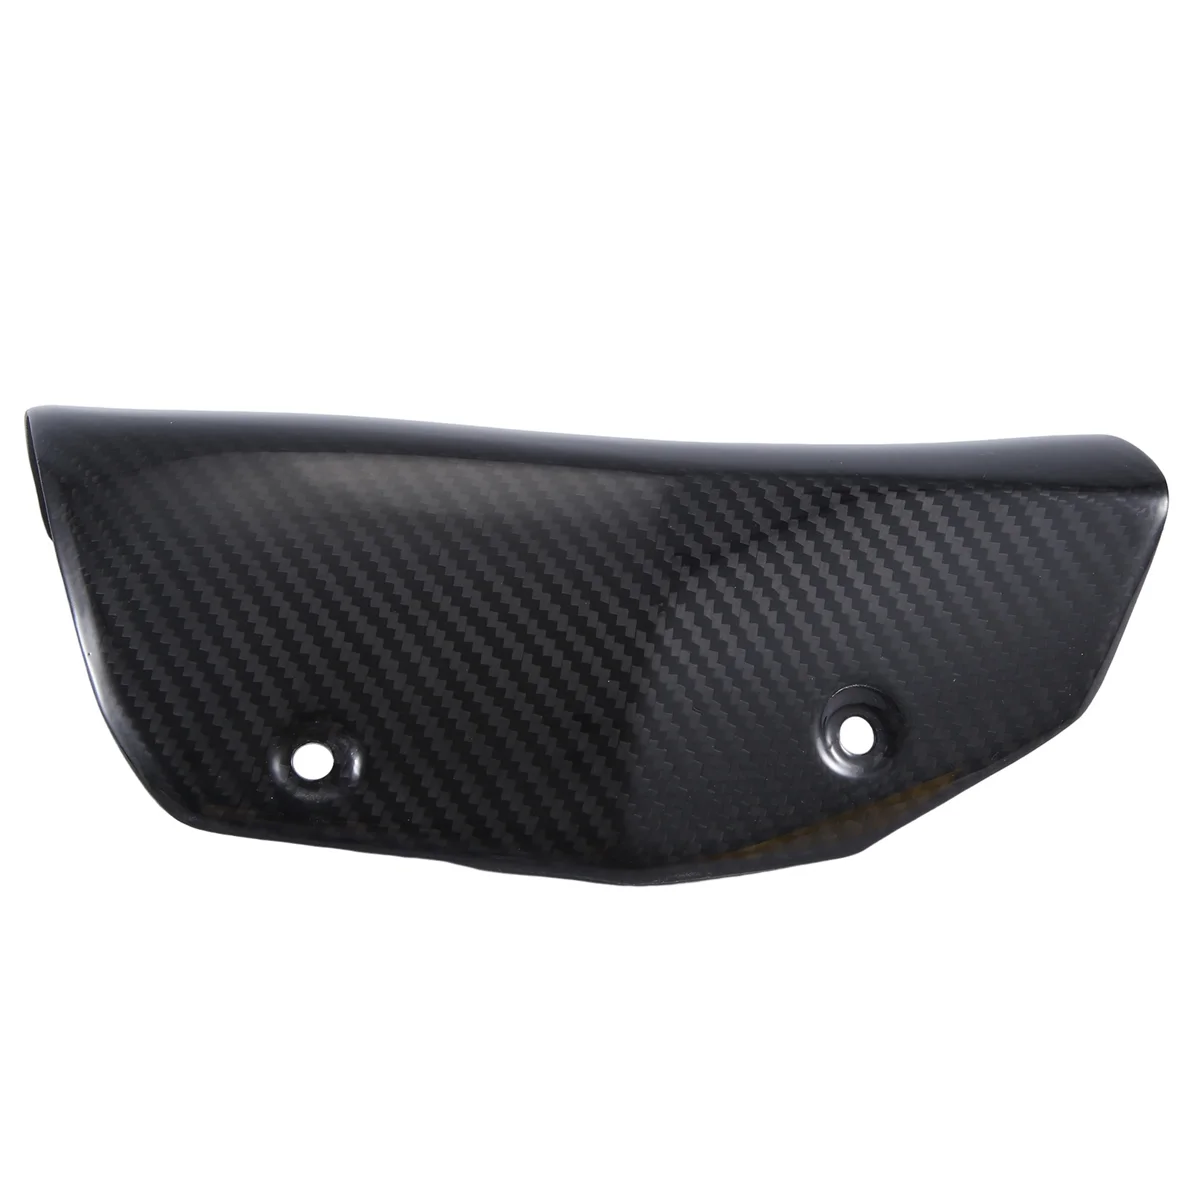 

Motorcycle Exhaust Muffler Carbon Fiber Protector Escape Heat Shield Cover Guard Anti-Scalding for Yamaha R1 MT10 R3